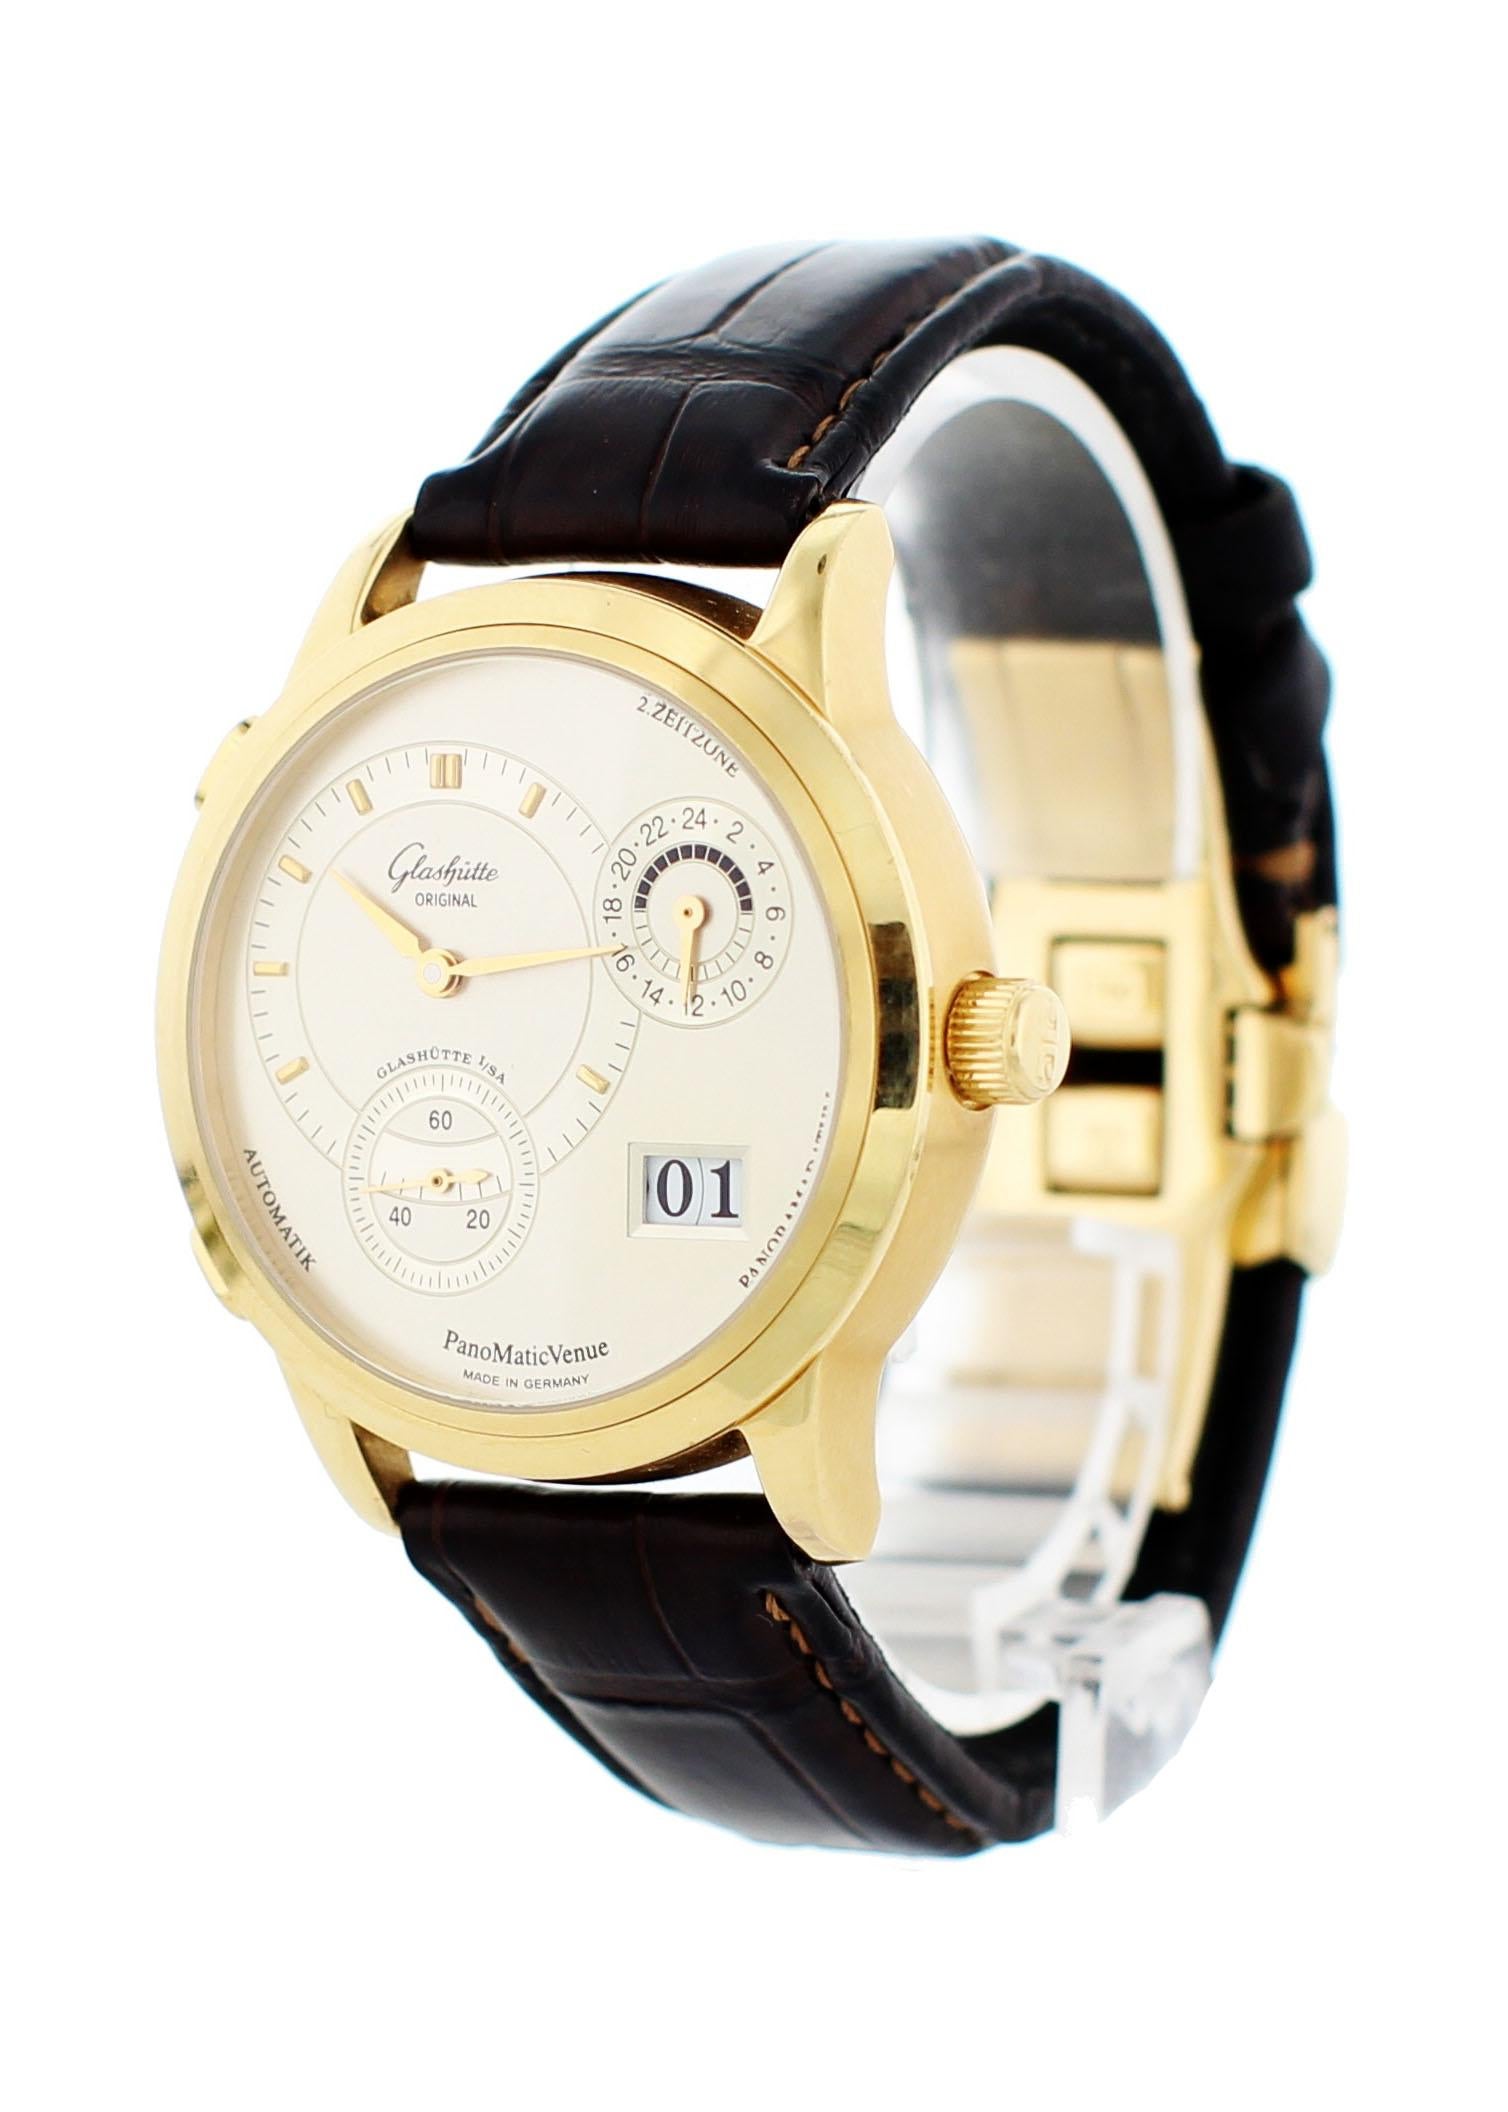 Glashutte Original Panomatic Venue 90-04-01-001-04. 39mm 18k Yellow Gold case with a smooth stationary bezel. Silver dial with steel hands and a small seconds subdial at the 7 o'clock position. Date display and a 24-hour indicator between the 2